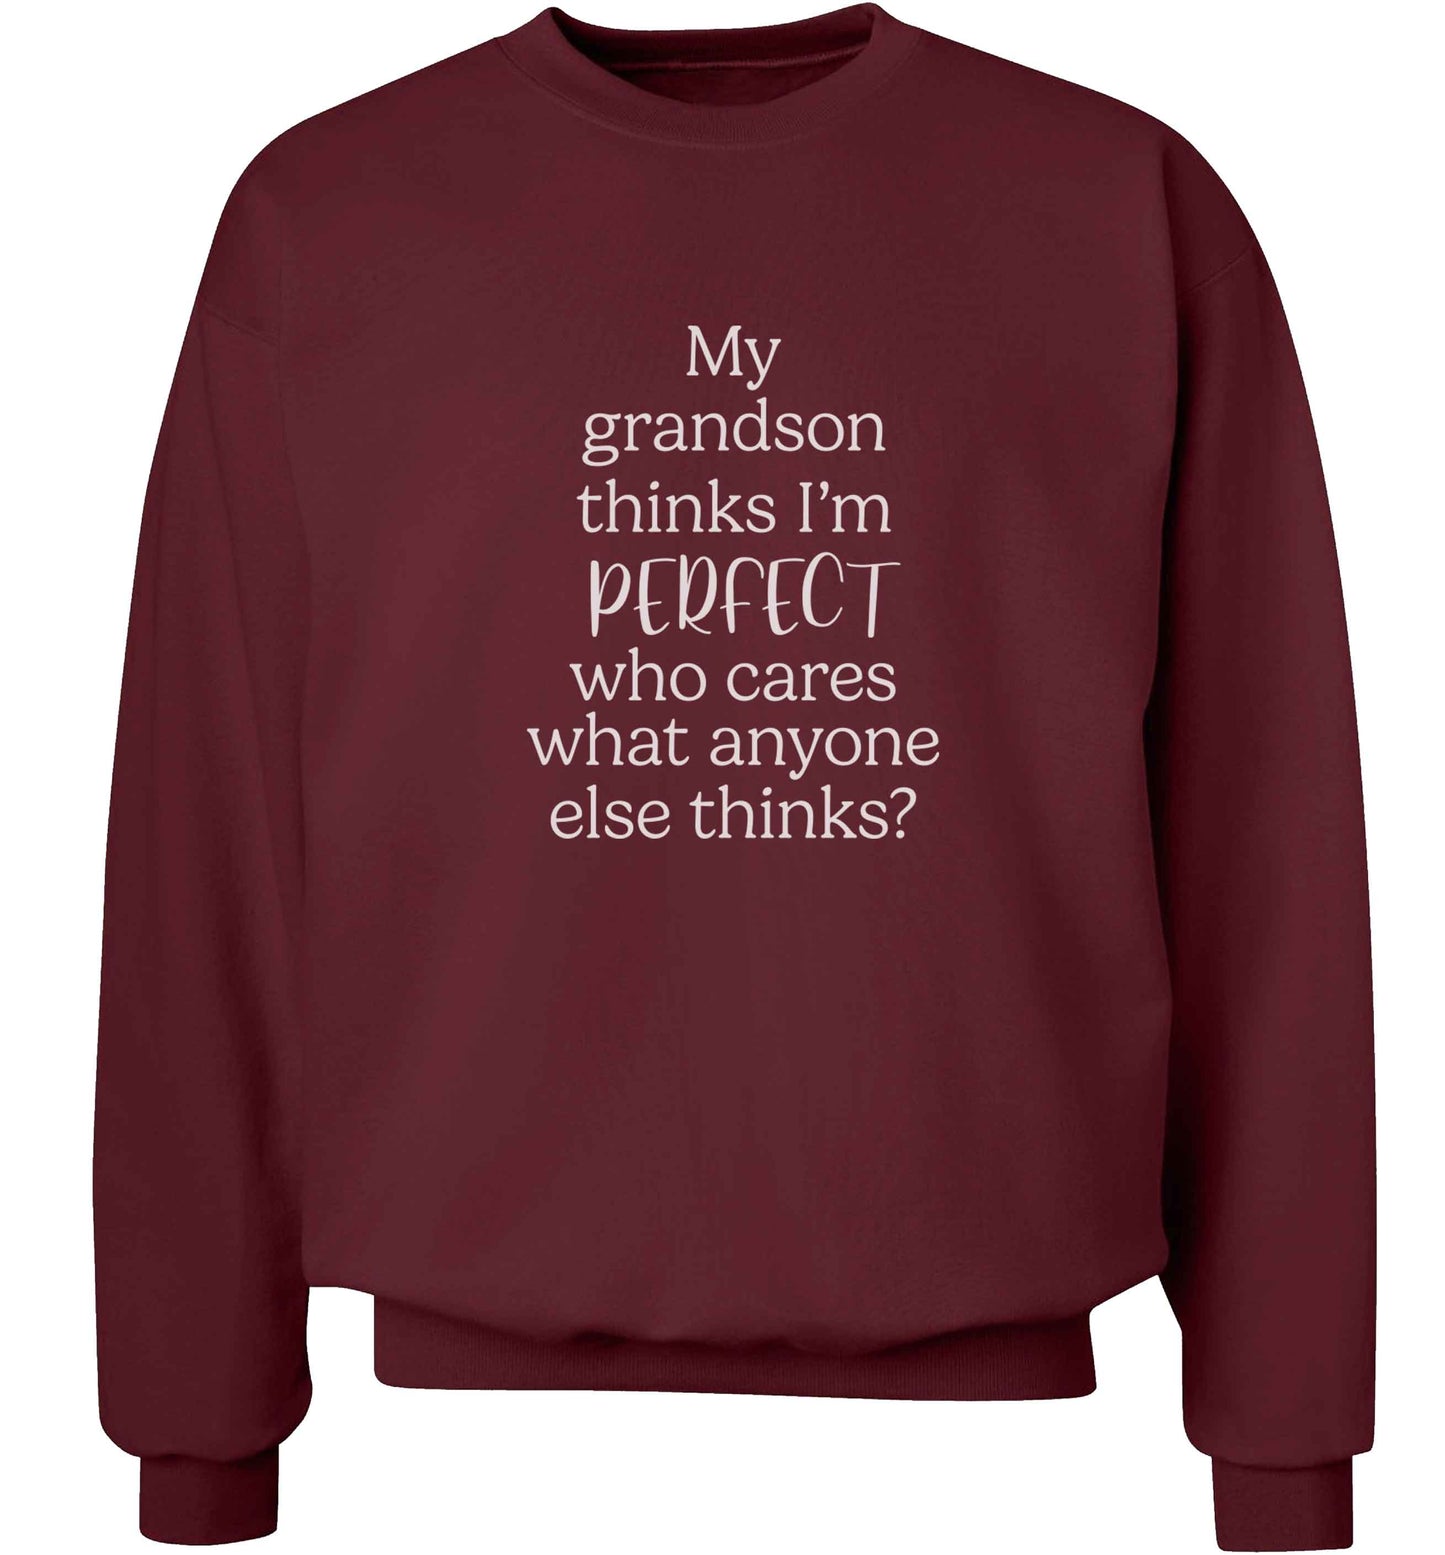 My Grandson thinks I'm perfect who cares what anyone else thinks? adult's unisex maroon sweater 2XL